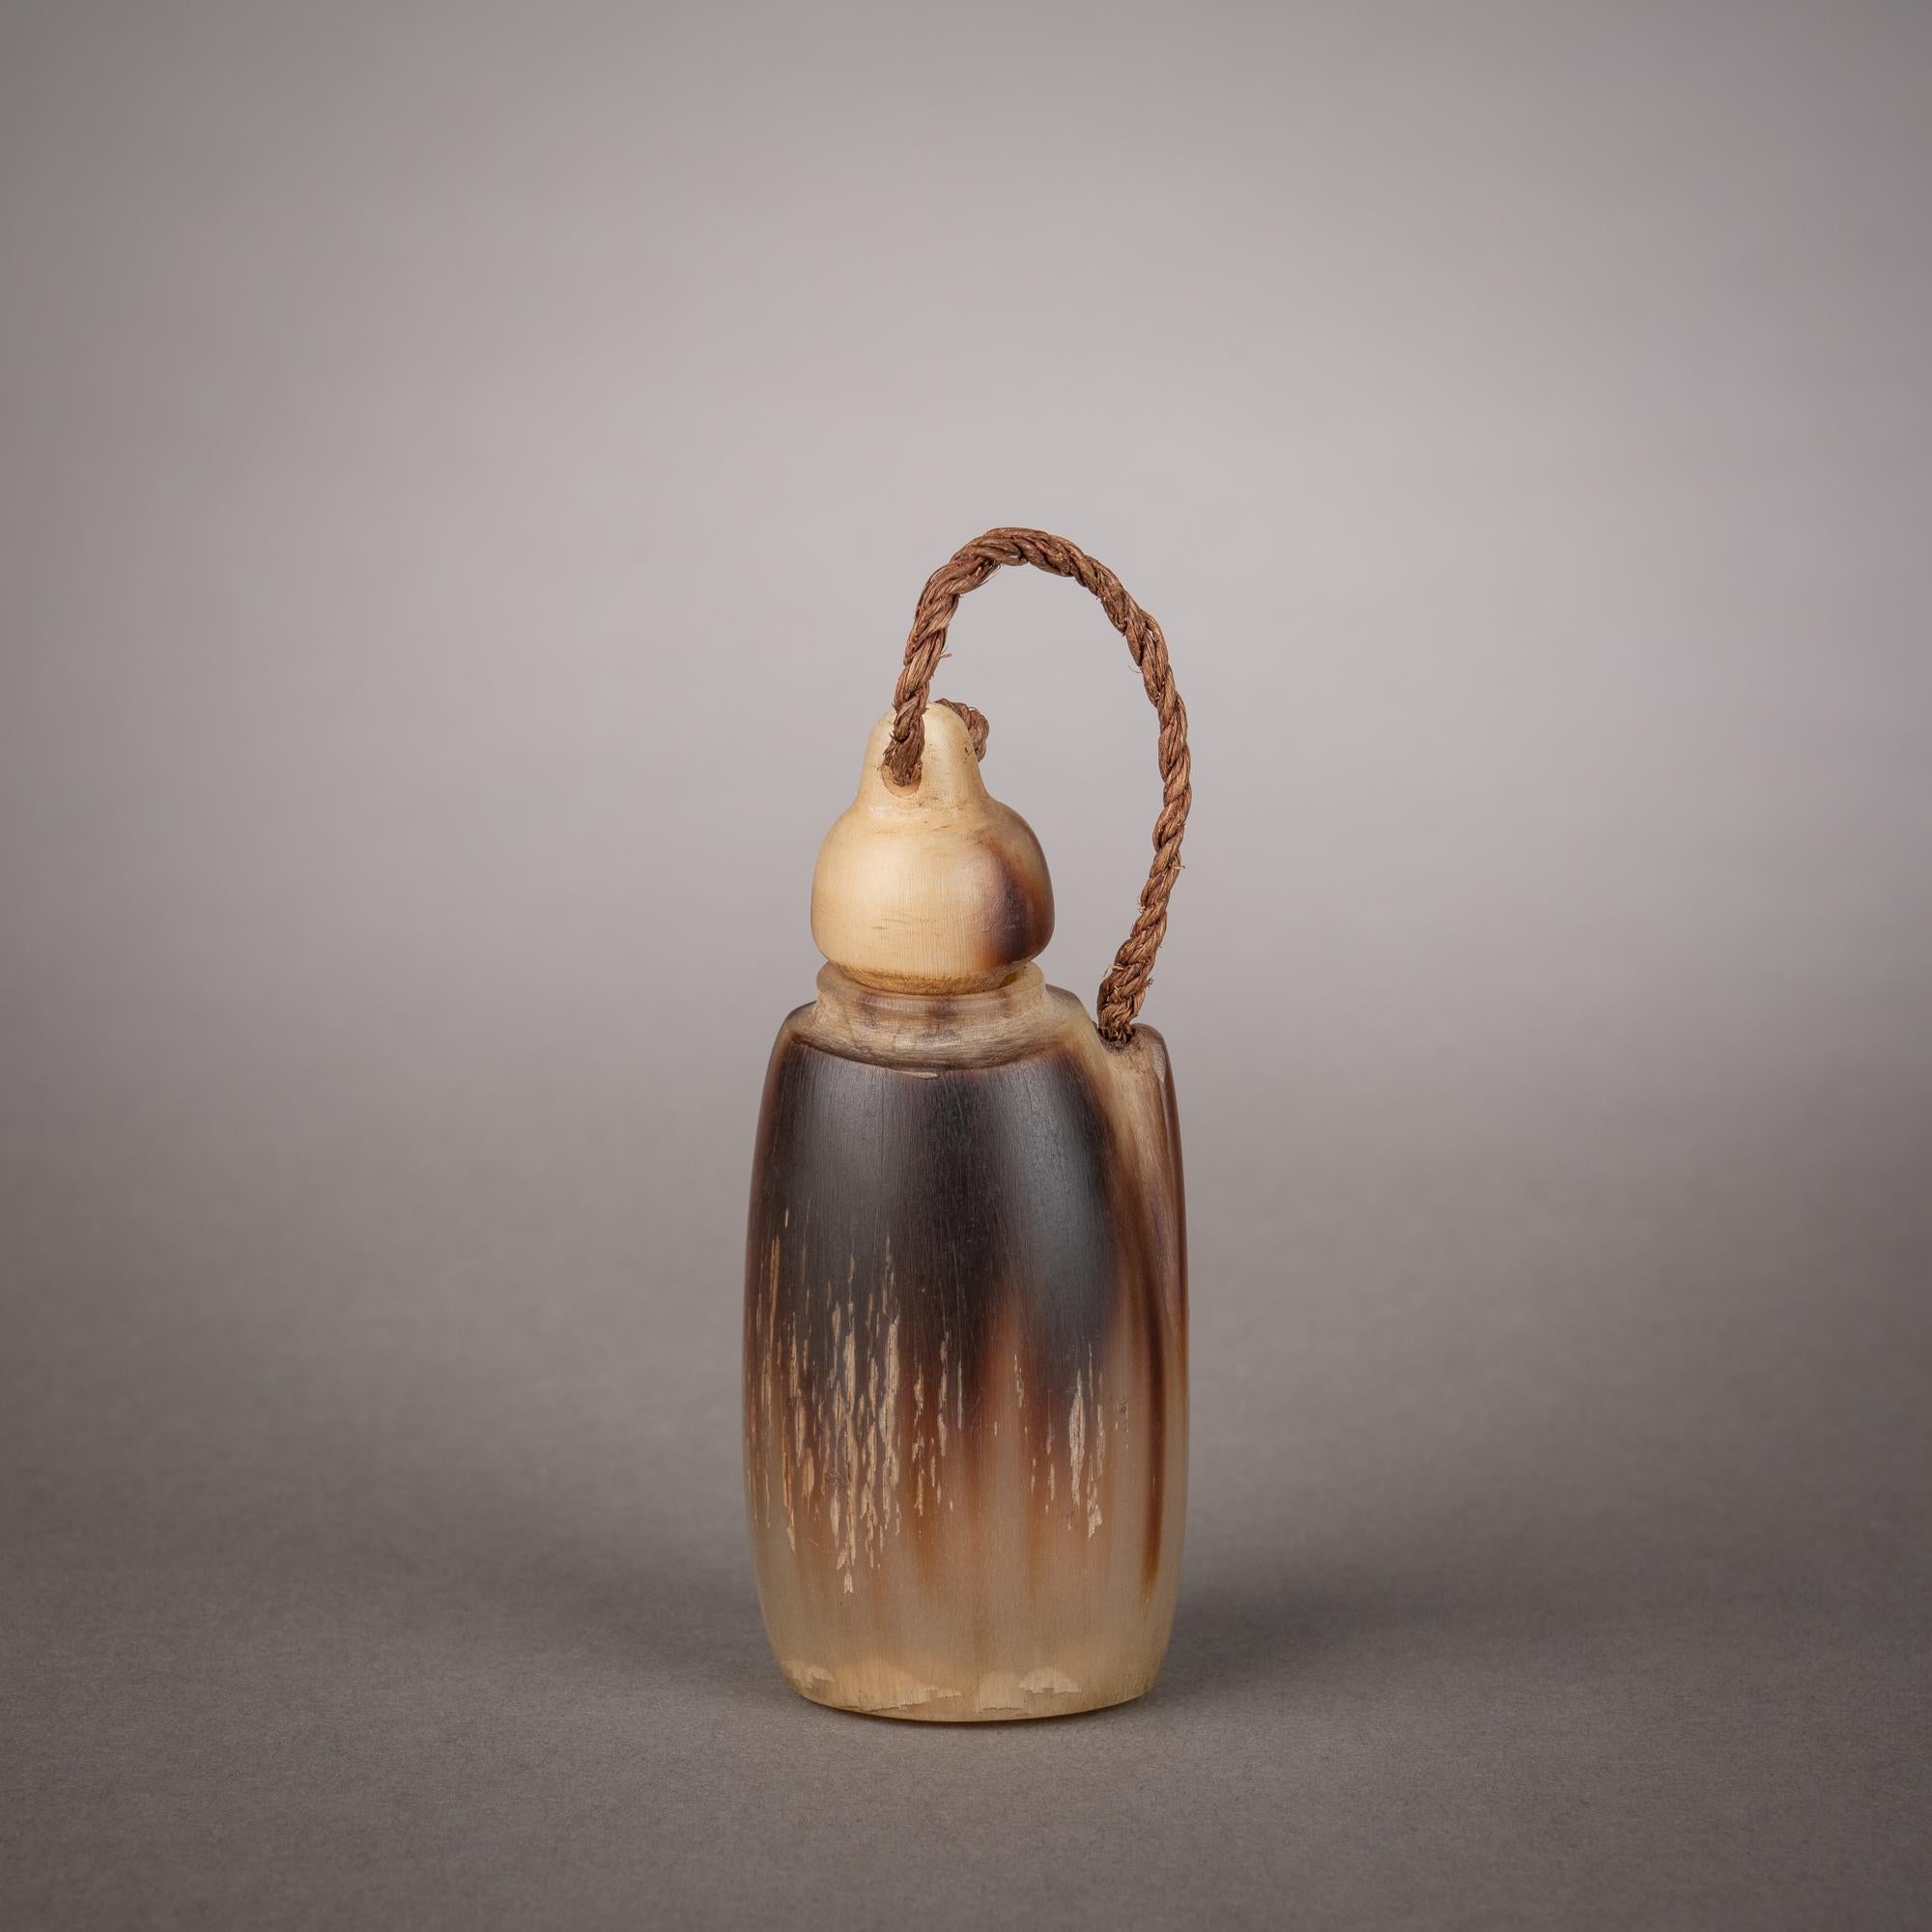 The soft, feathered play of light and dark over the surface of this snuff container perfectly illustrates the subtle beauty found in horn carvings and the unique effects the medium offers to artisans. A refined horn snuff container such as this